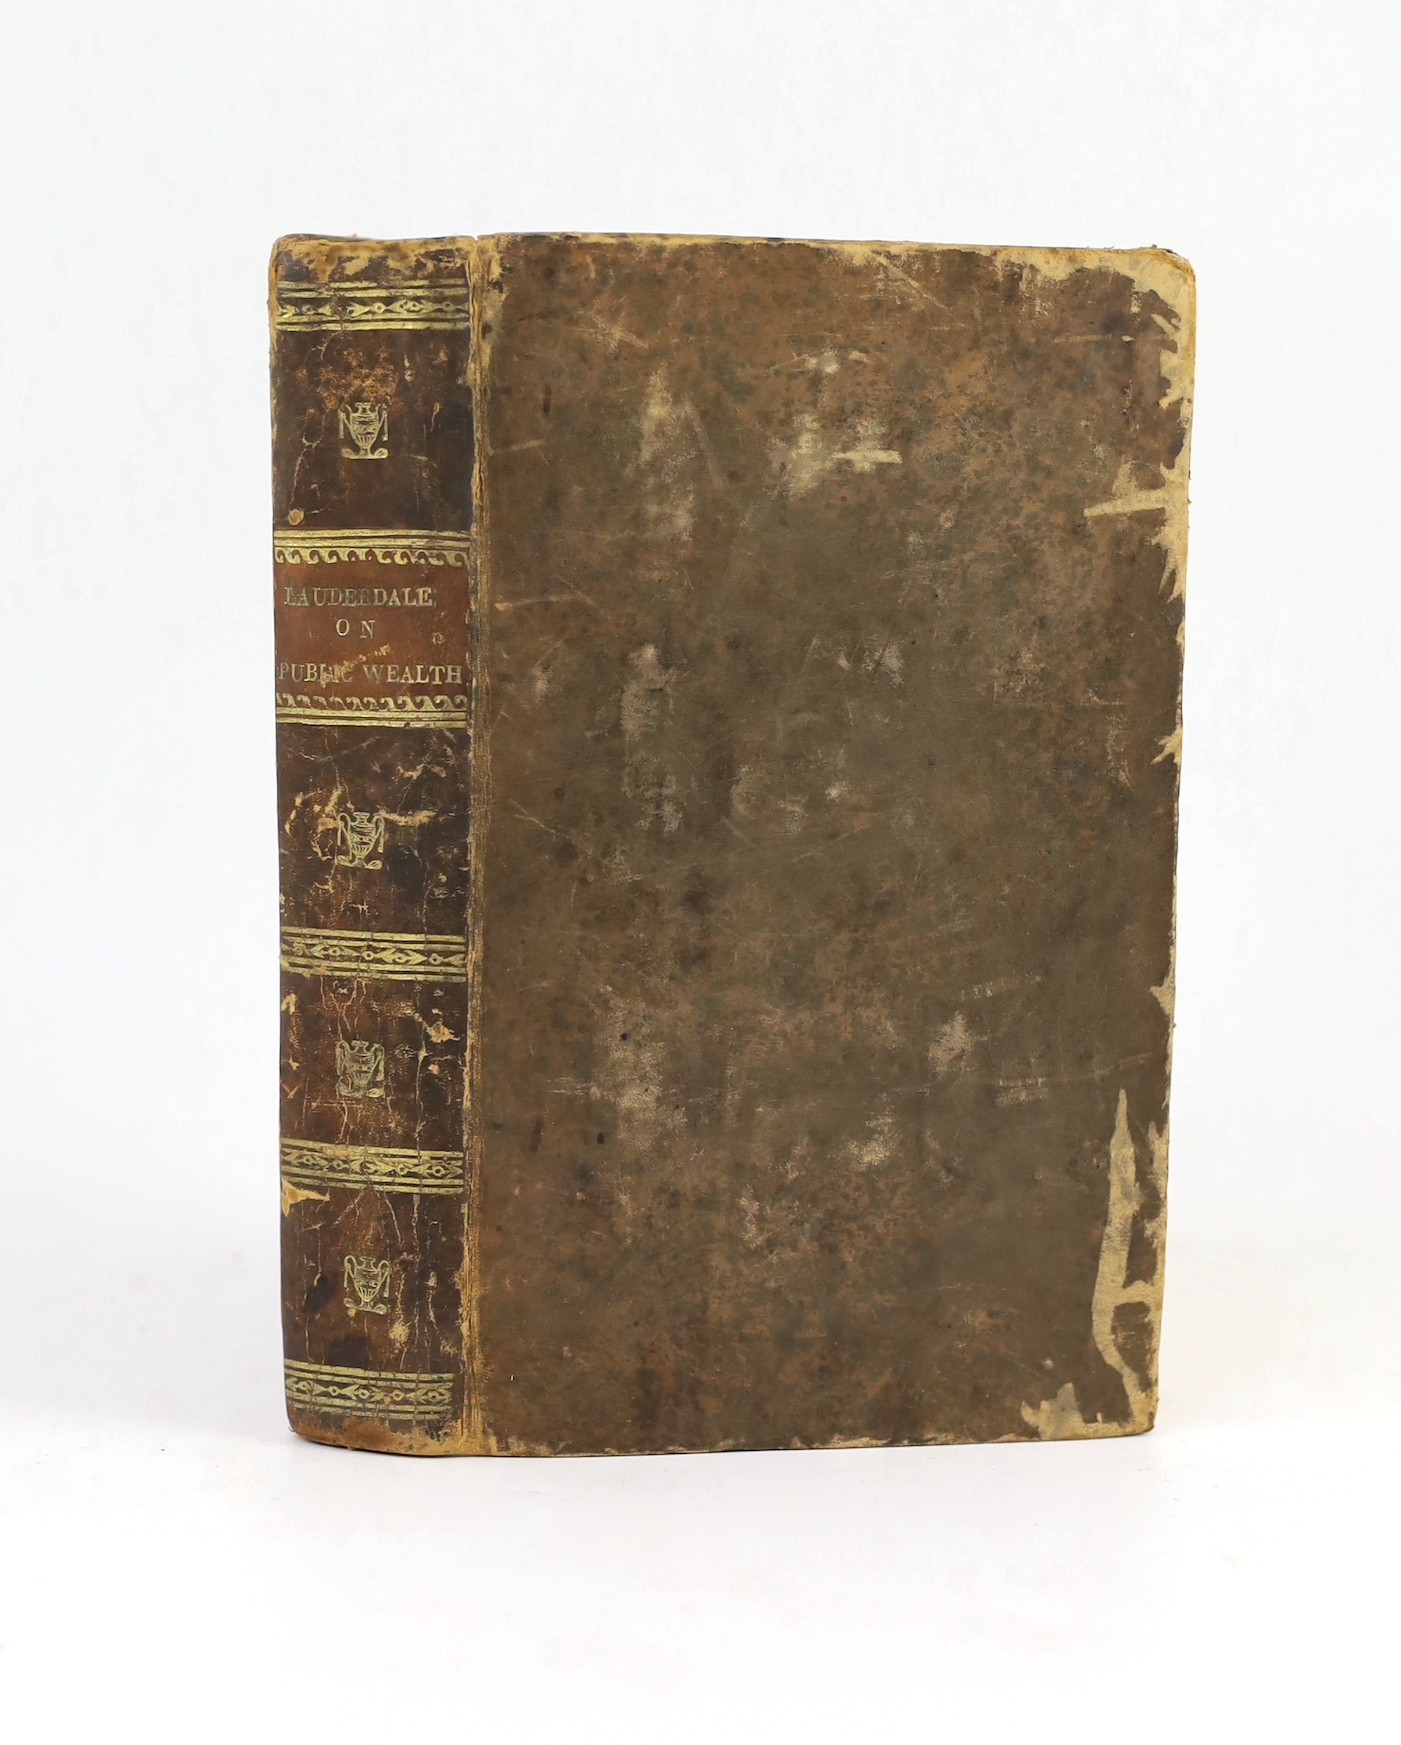 Maitland, James (Earl of Lauderdale) - An Inquiry into the Nature and Origin of Public Wealth, and into the means of its increase. First Edition.